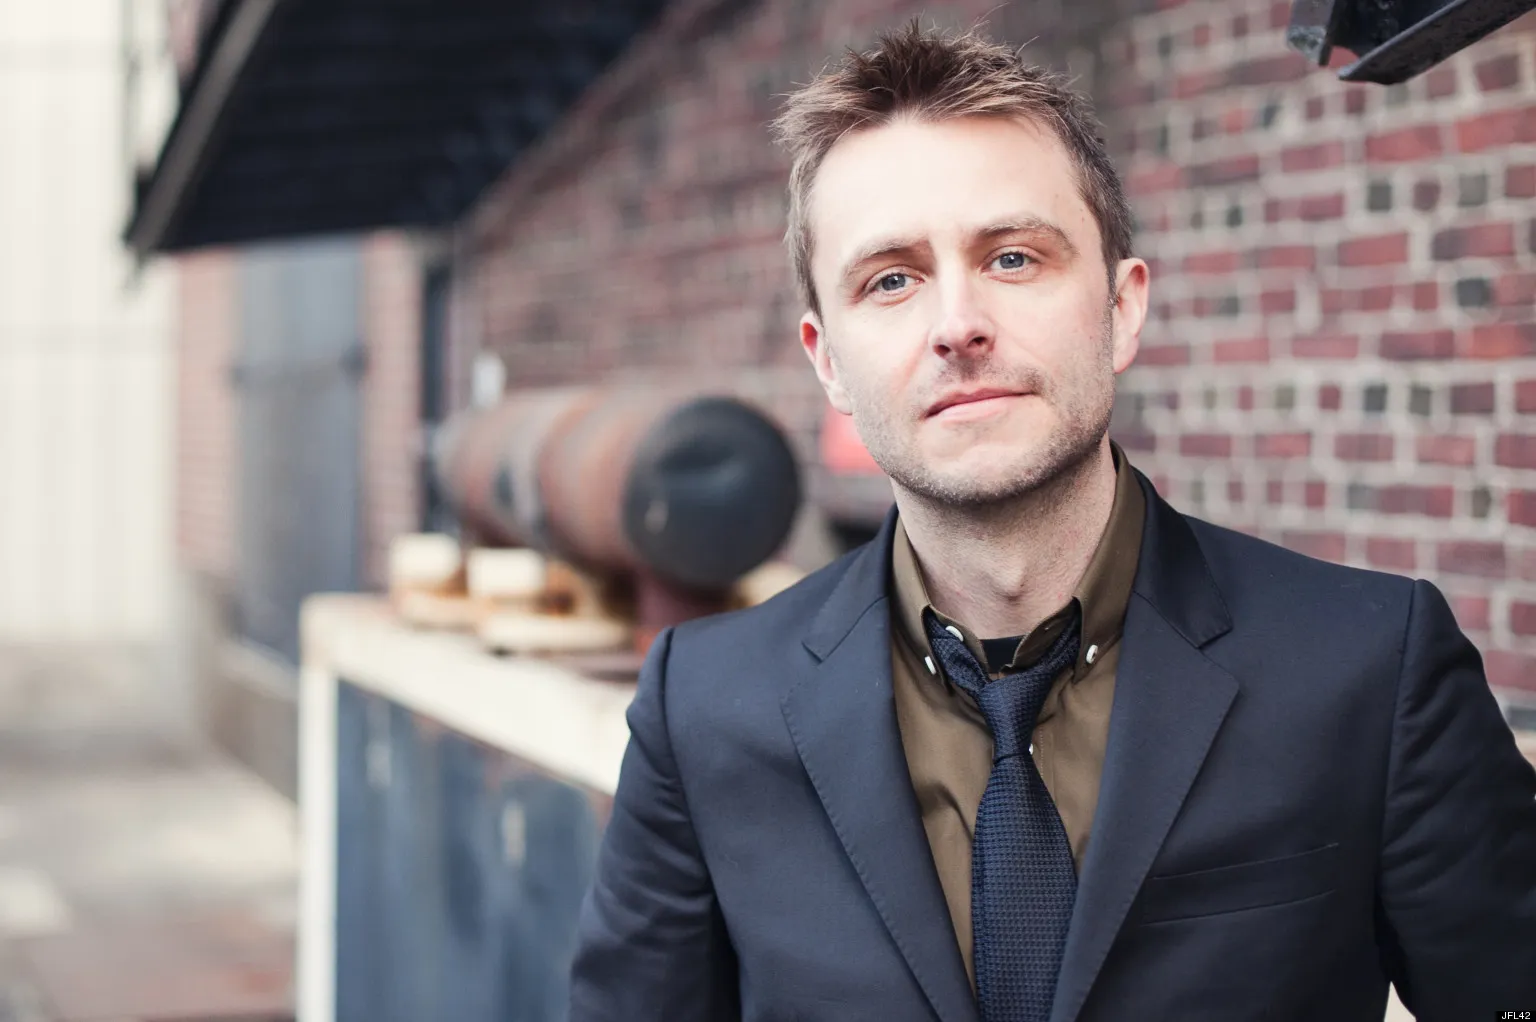 Chris Hardwick VR Addiction Is 'Going To Be A Problem'